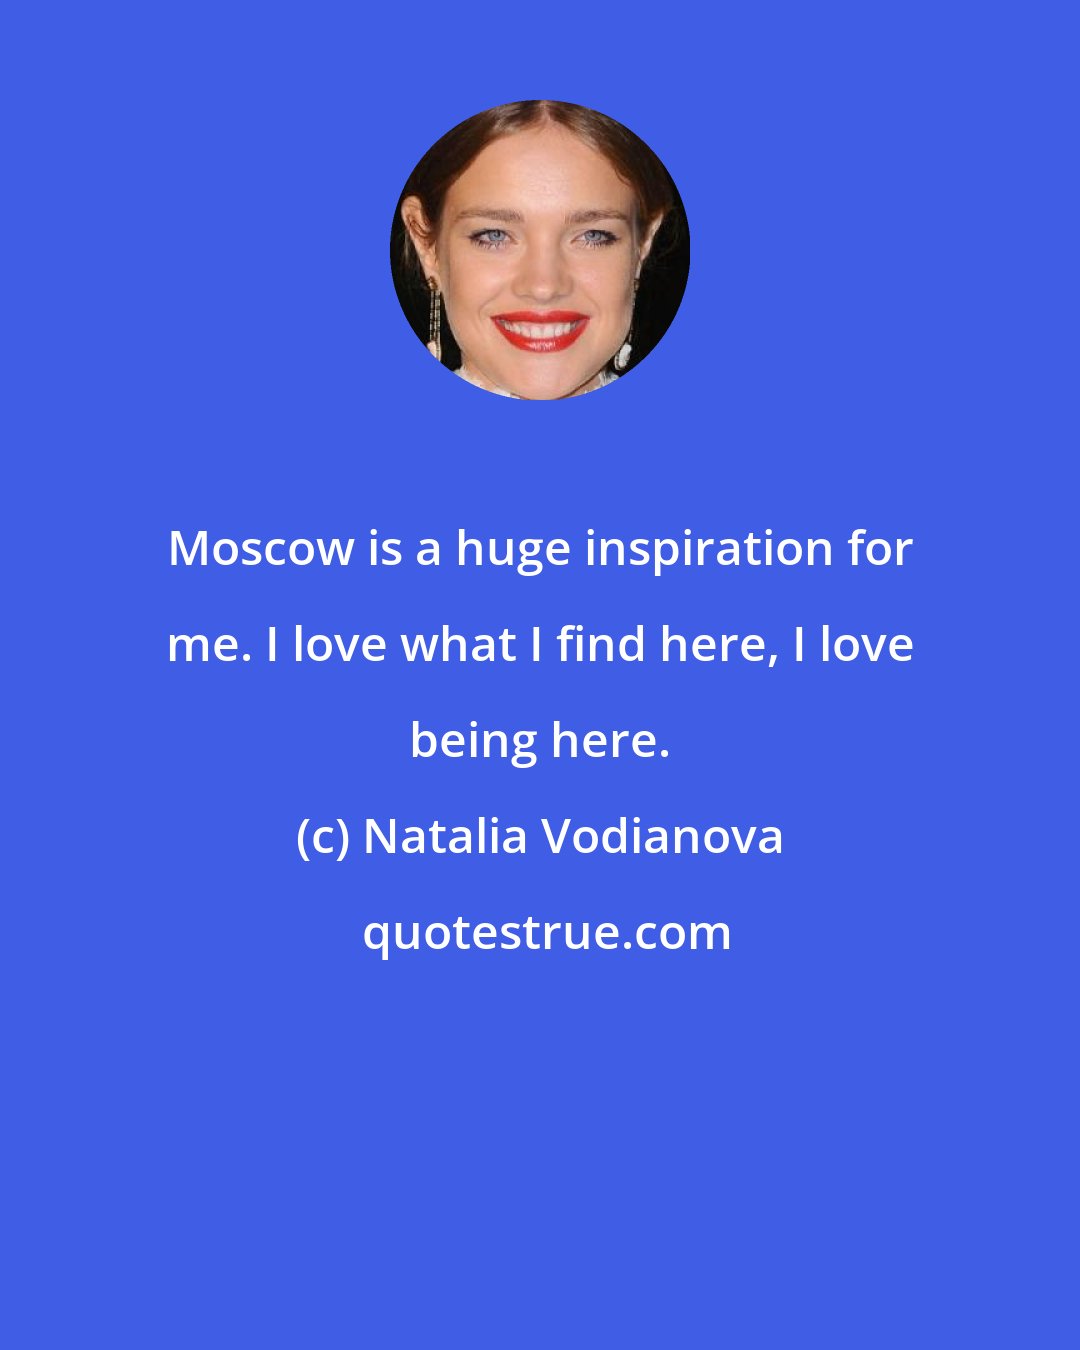 Natalia Vodianova: Moscow is a huge inspiration for me. I love what I find here, I love being here.